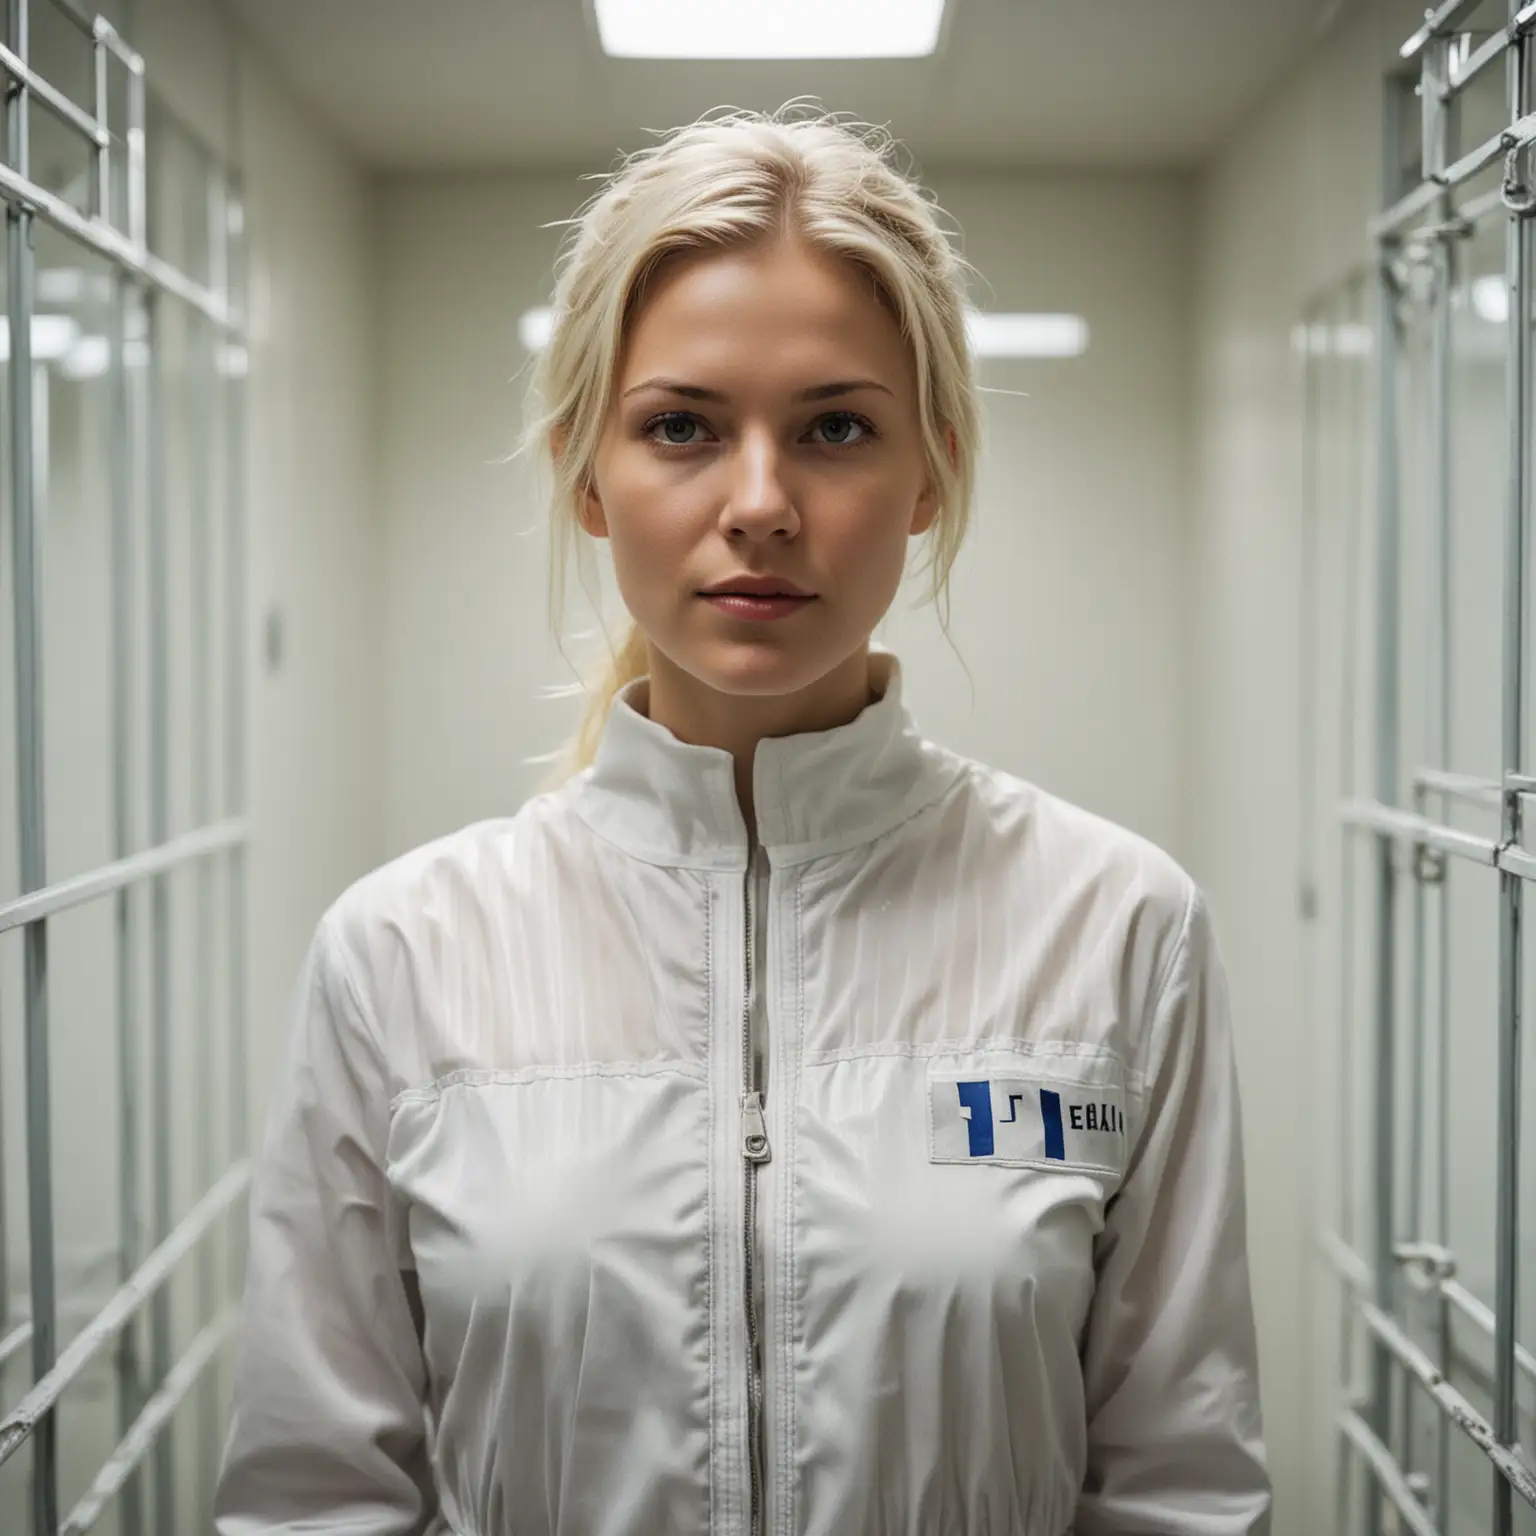 Nordic Woman in White Prison Jumpsuit Behind Glass Fronted Cell